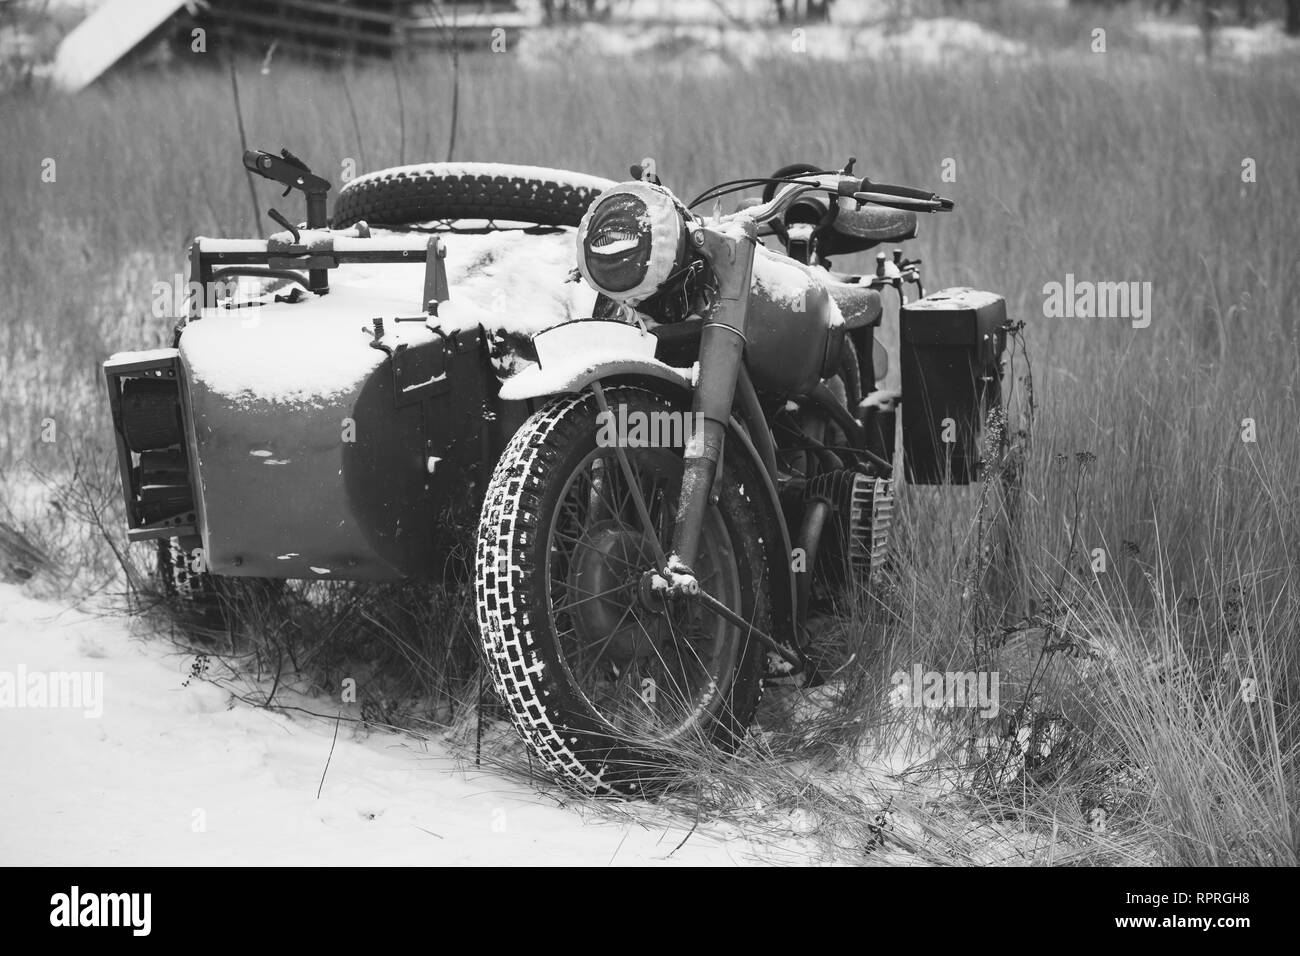 Old Tricar, Three-Wheeled Motorbike Of Wehrmacht, Armed Forces Of Germany Of World War II Time In Winter Forest Stock Photo